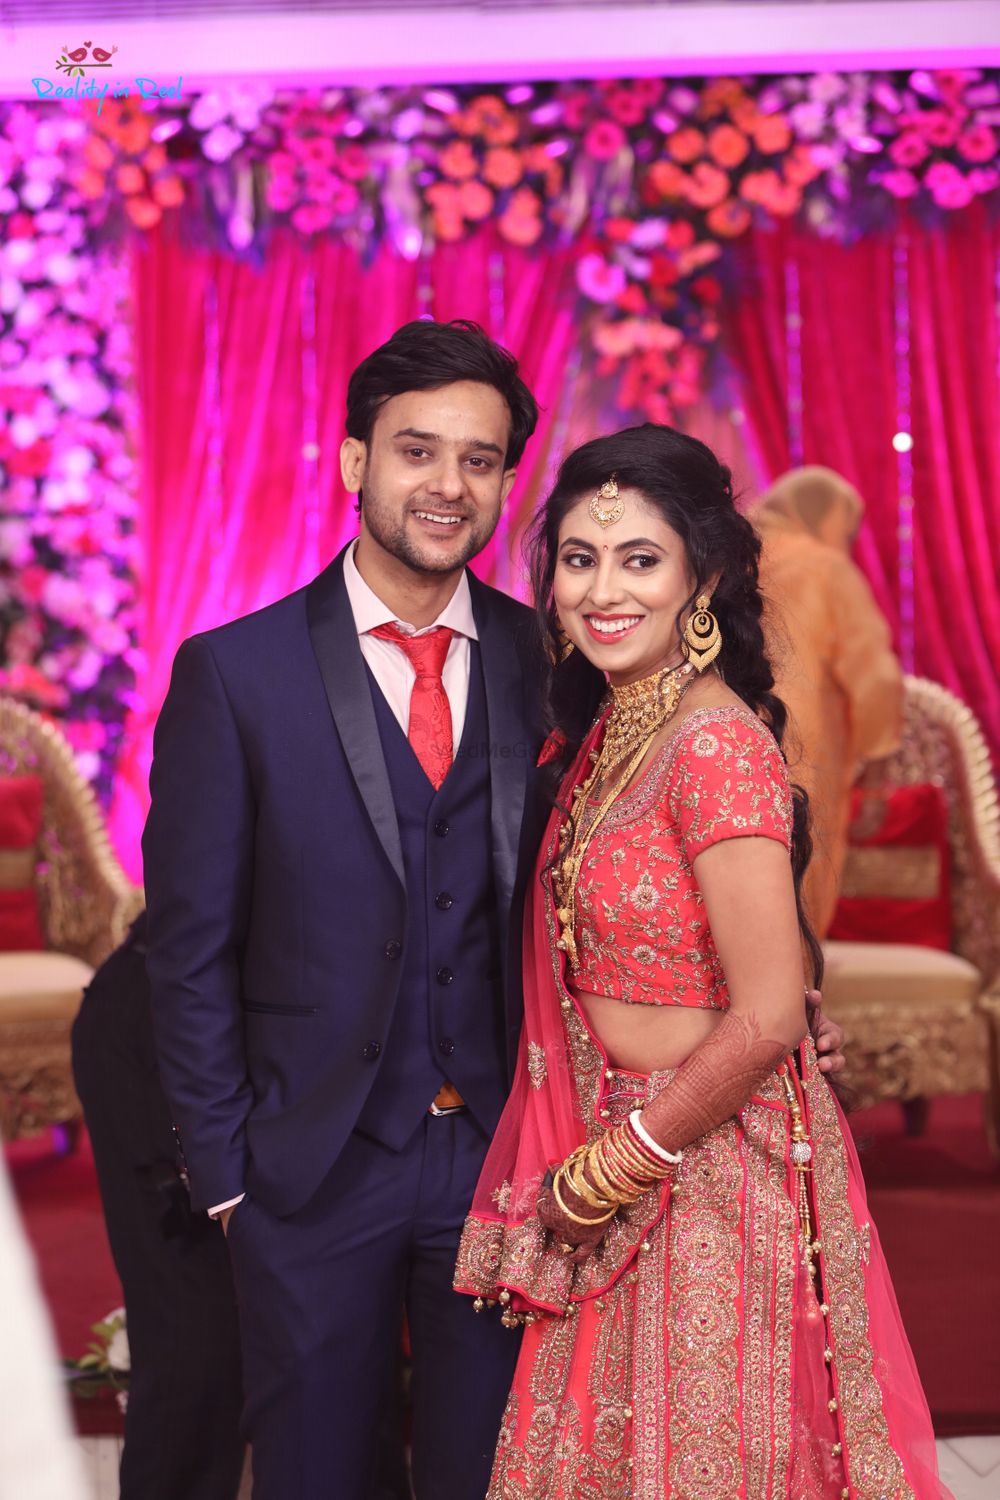 Photo From Naveen & Reshmi - By Reality in Reel